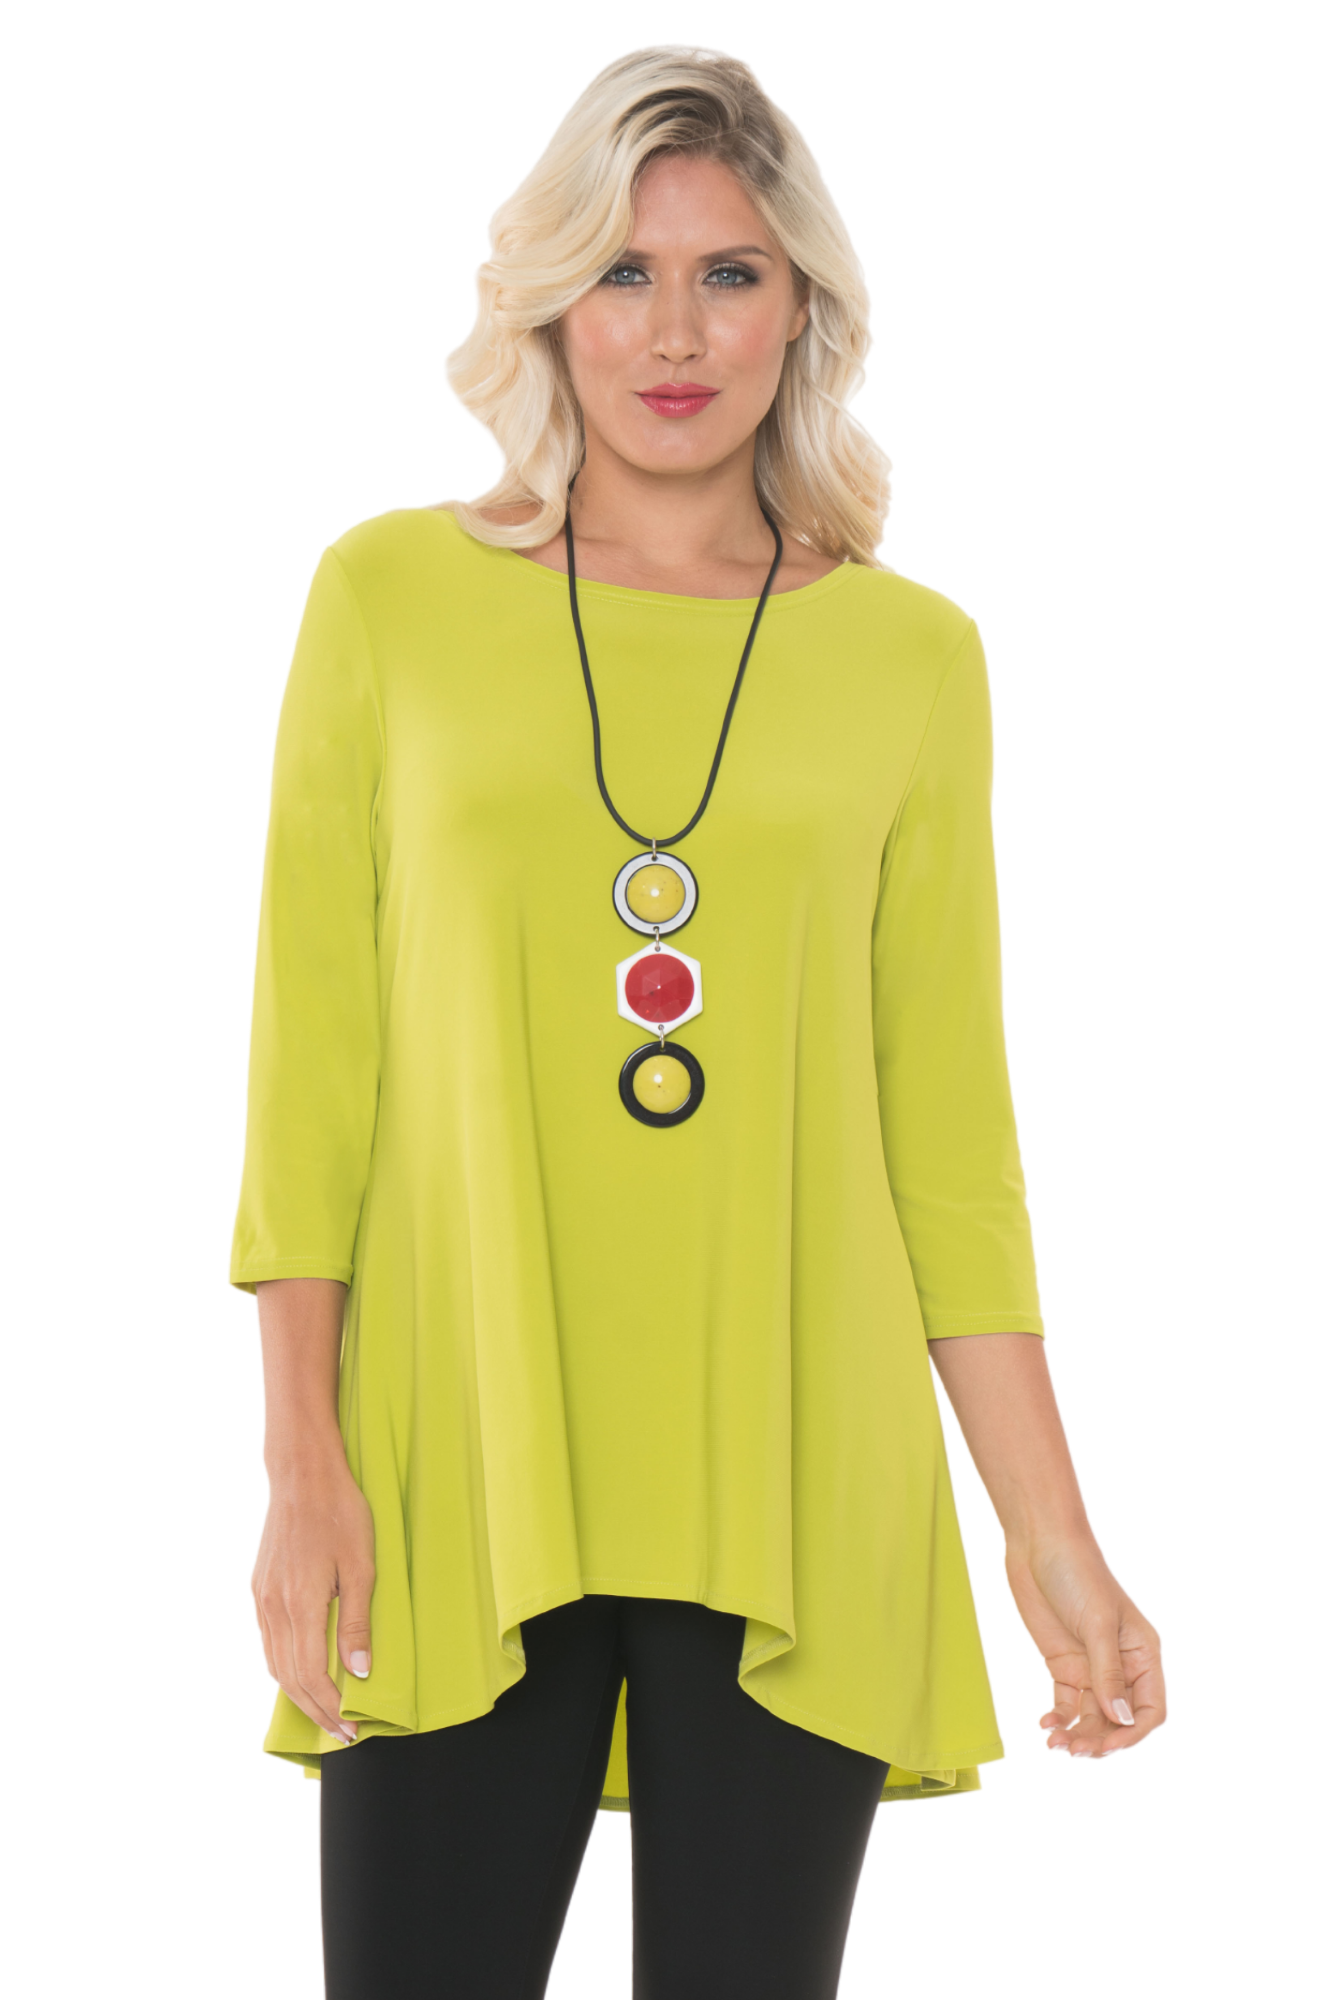 Women's High Low Tunic Tops For Leggings - Bright Colors – Lior